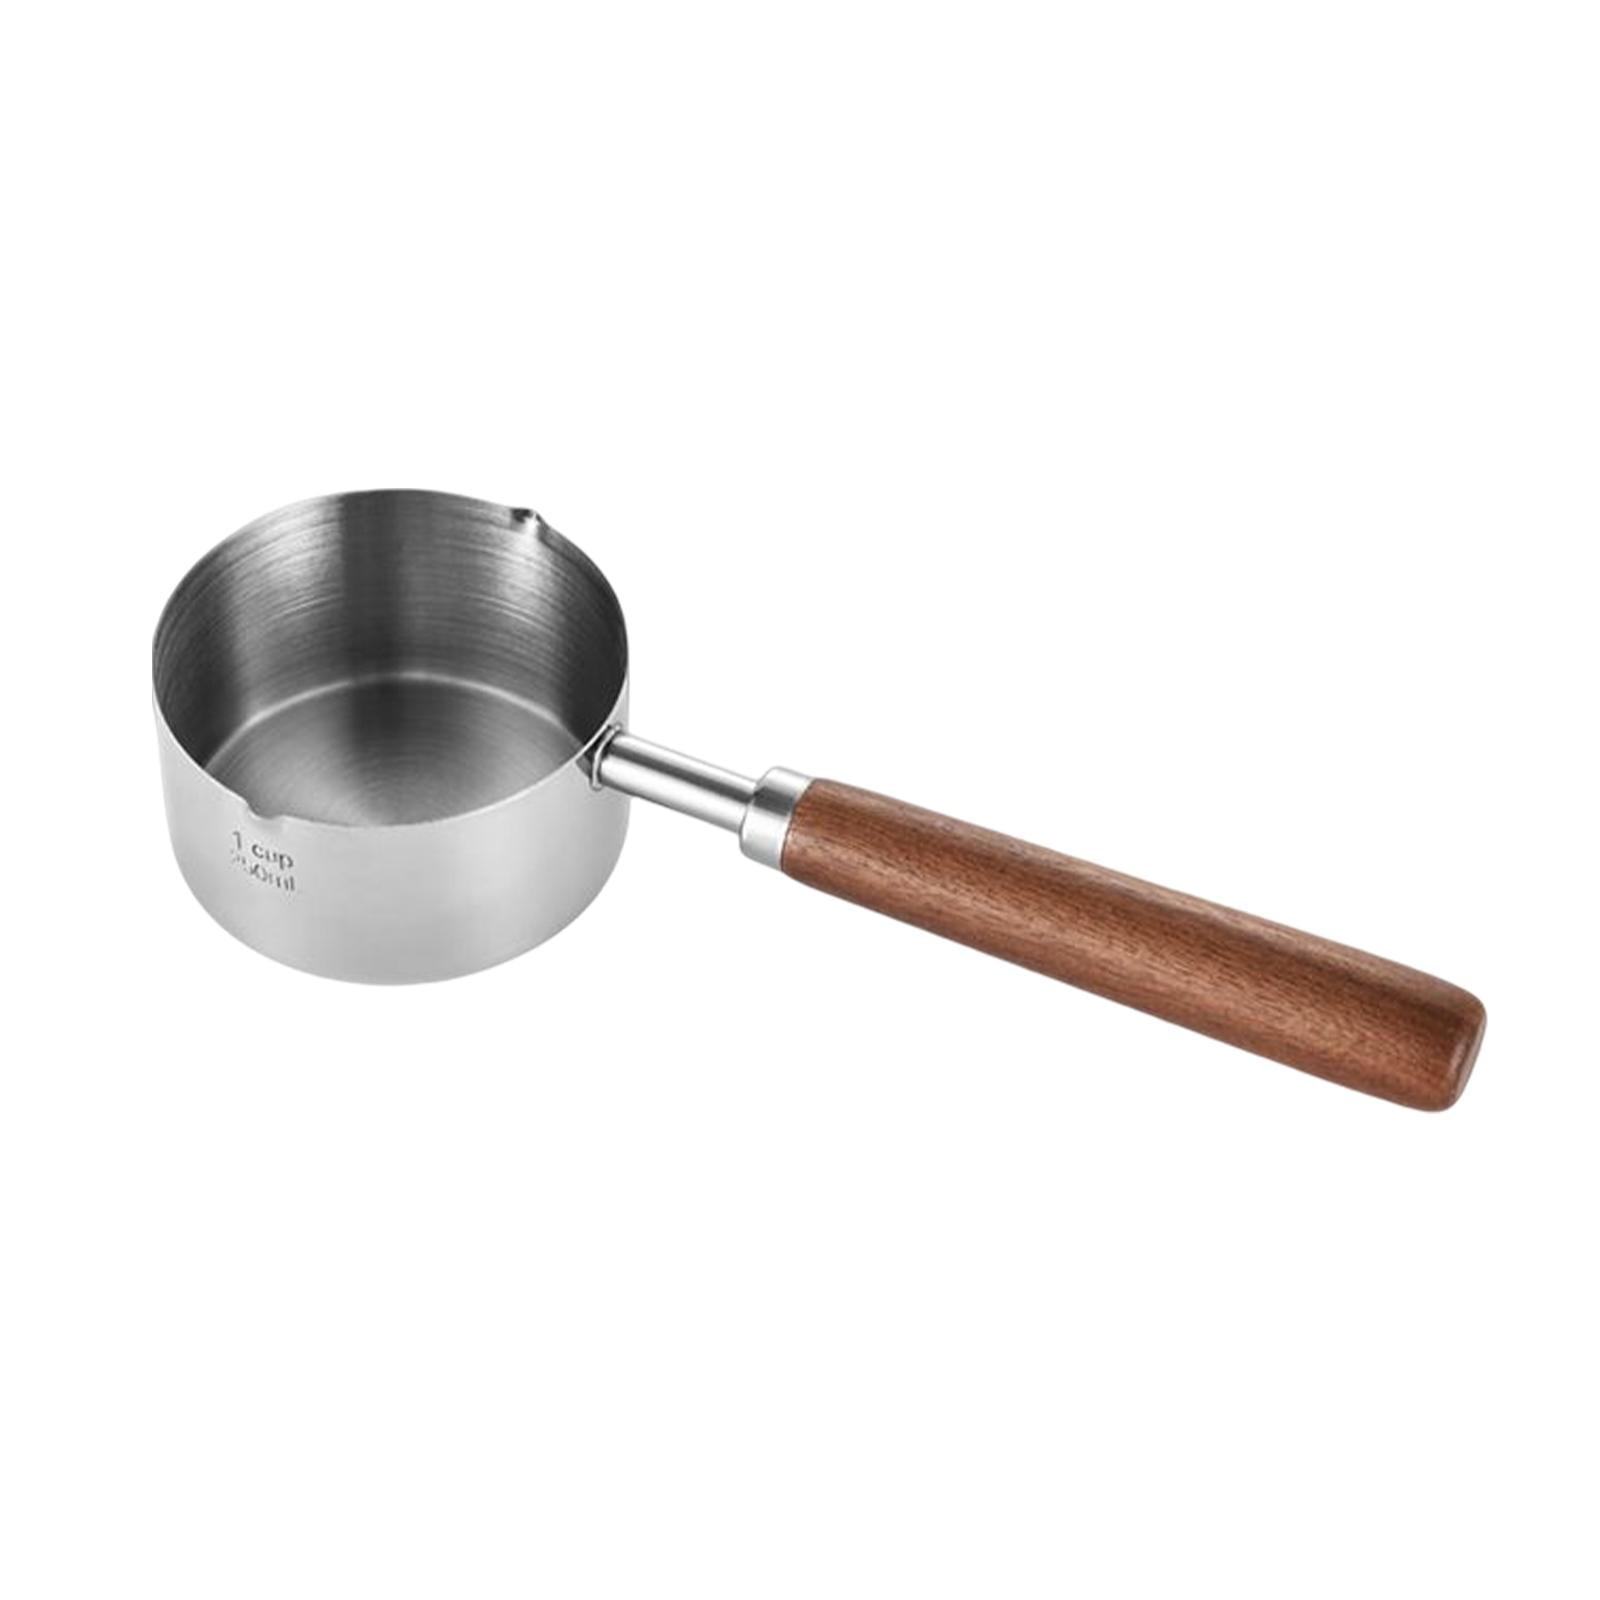 Small Condiment Sauce Pan with Pouring Spouts Universal Mini Saucepan for  Making Sauces Make Easy Cooking Oven , Small 